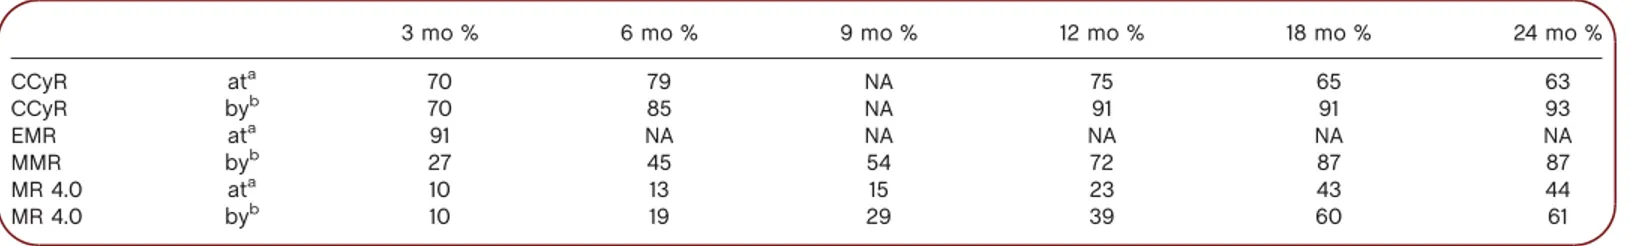 TABLE I. Cytogenetic and Molecular Response During the Core Phase of the Study (24 Months)